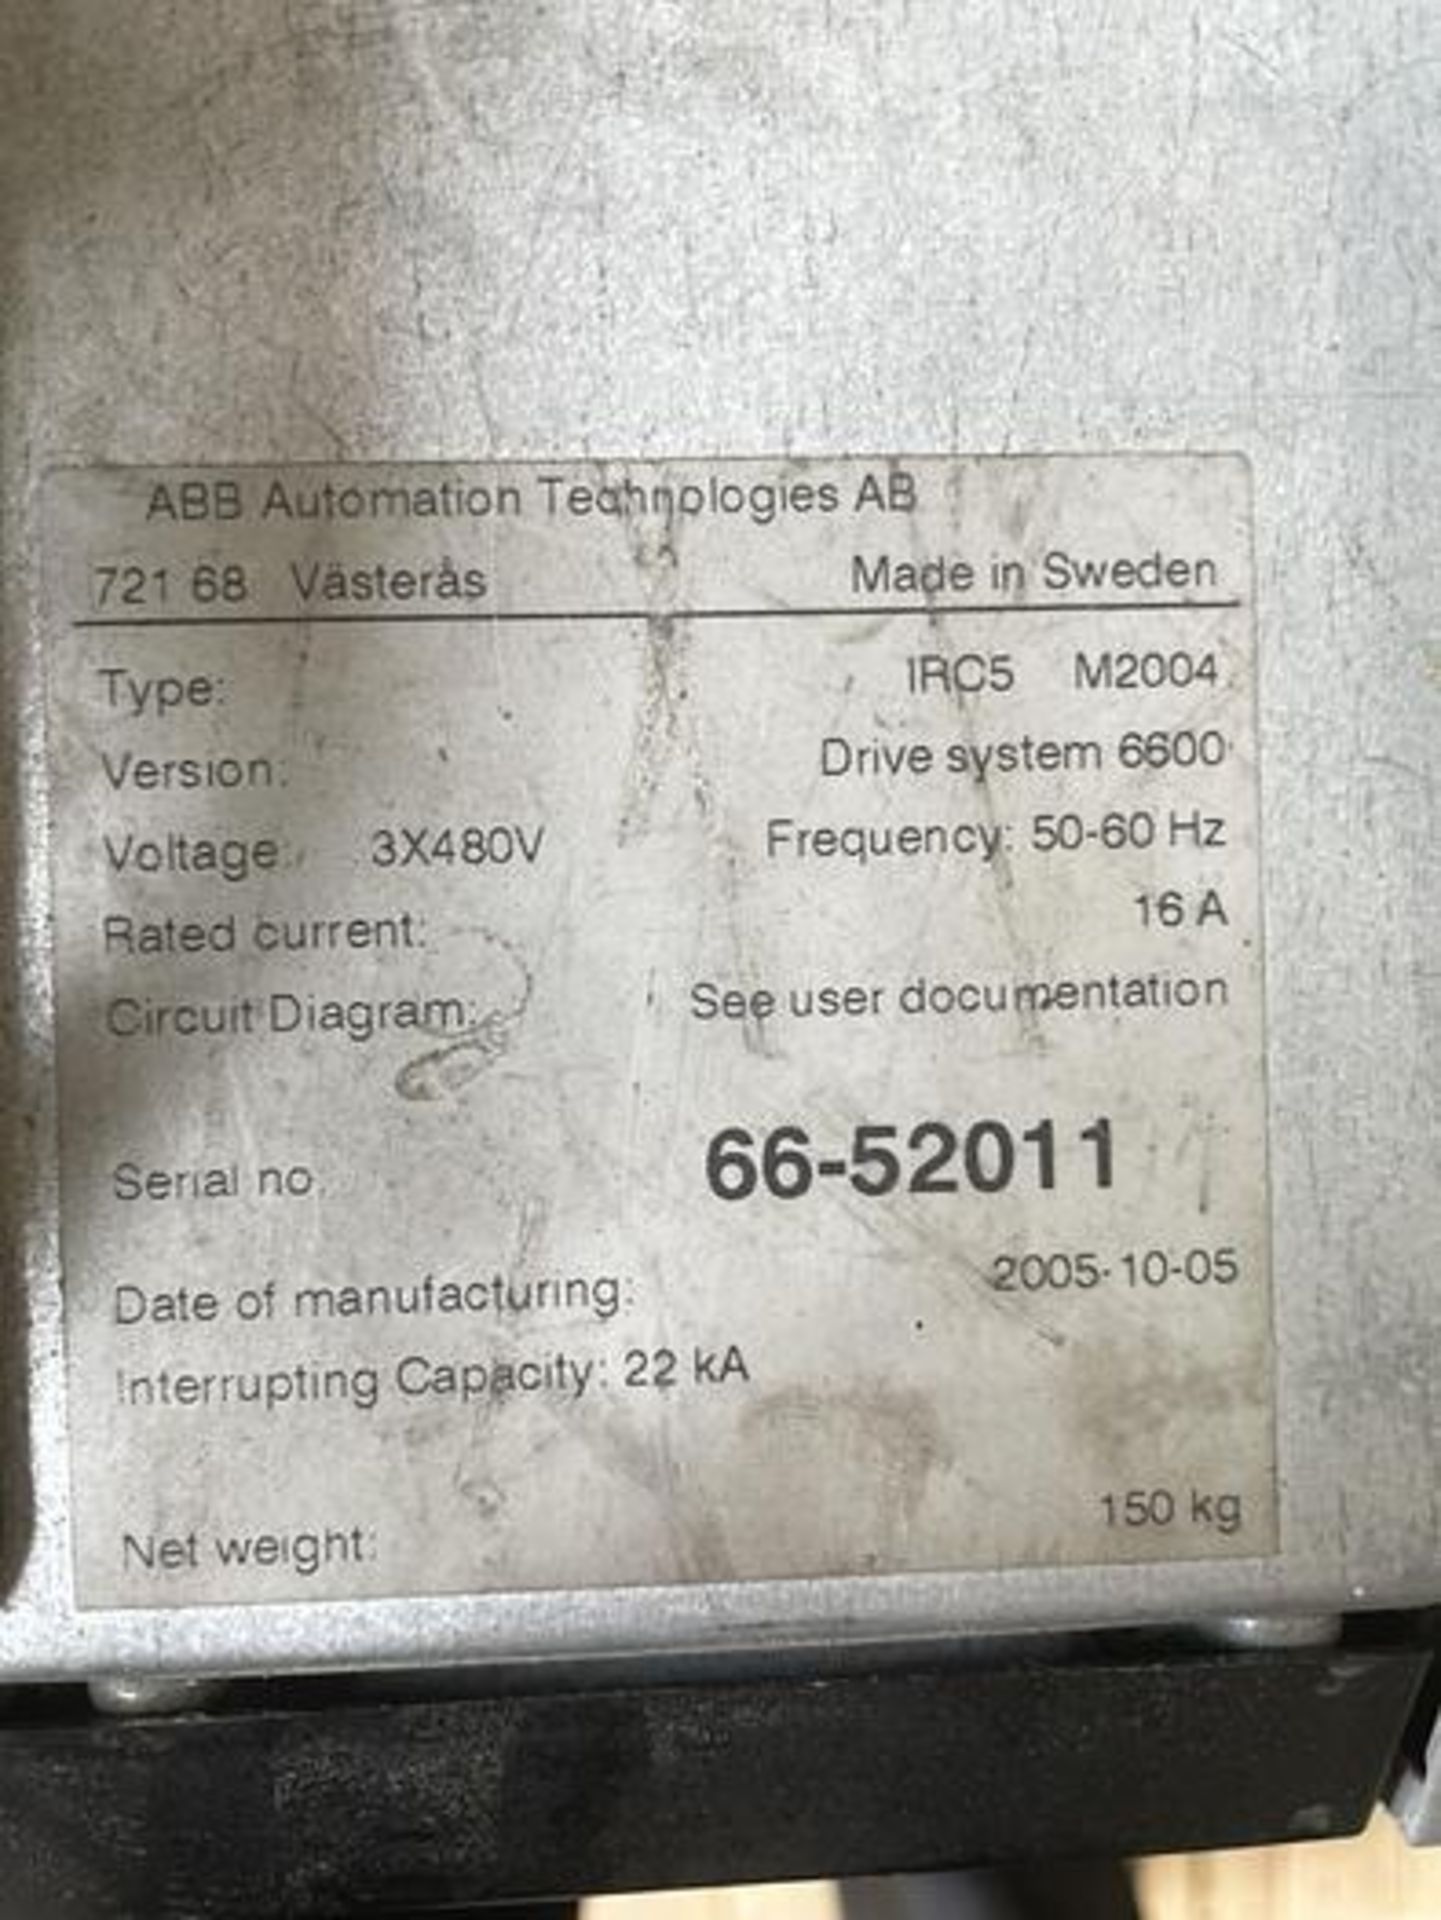 ABB IRB 6600-225/2.55 ROBOT CELL WITH 7TH & 8TH AXIS 40KG INDEXING TABLE - Image 12 of 13